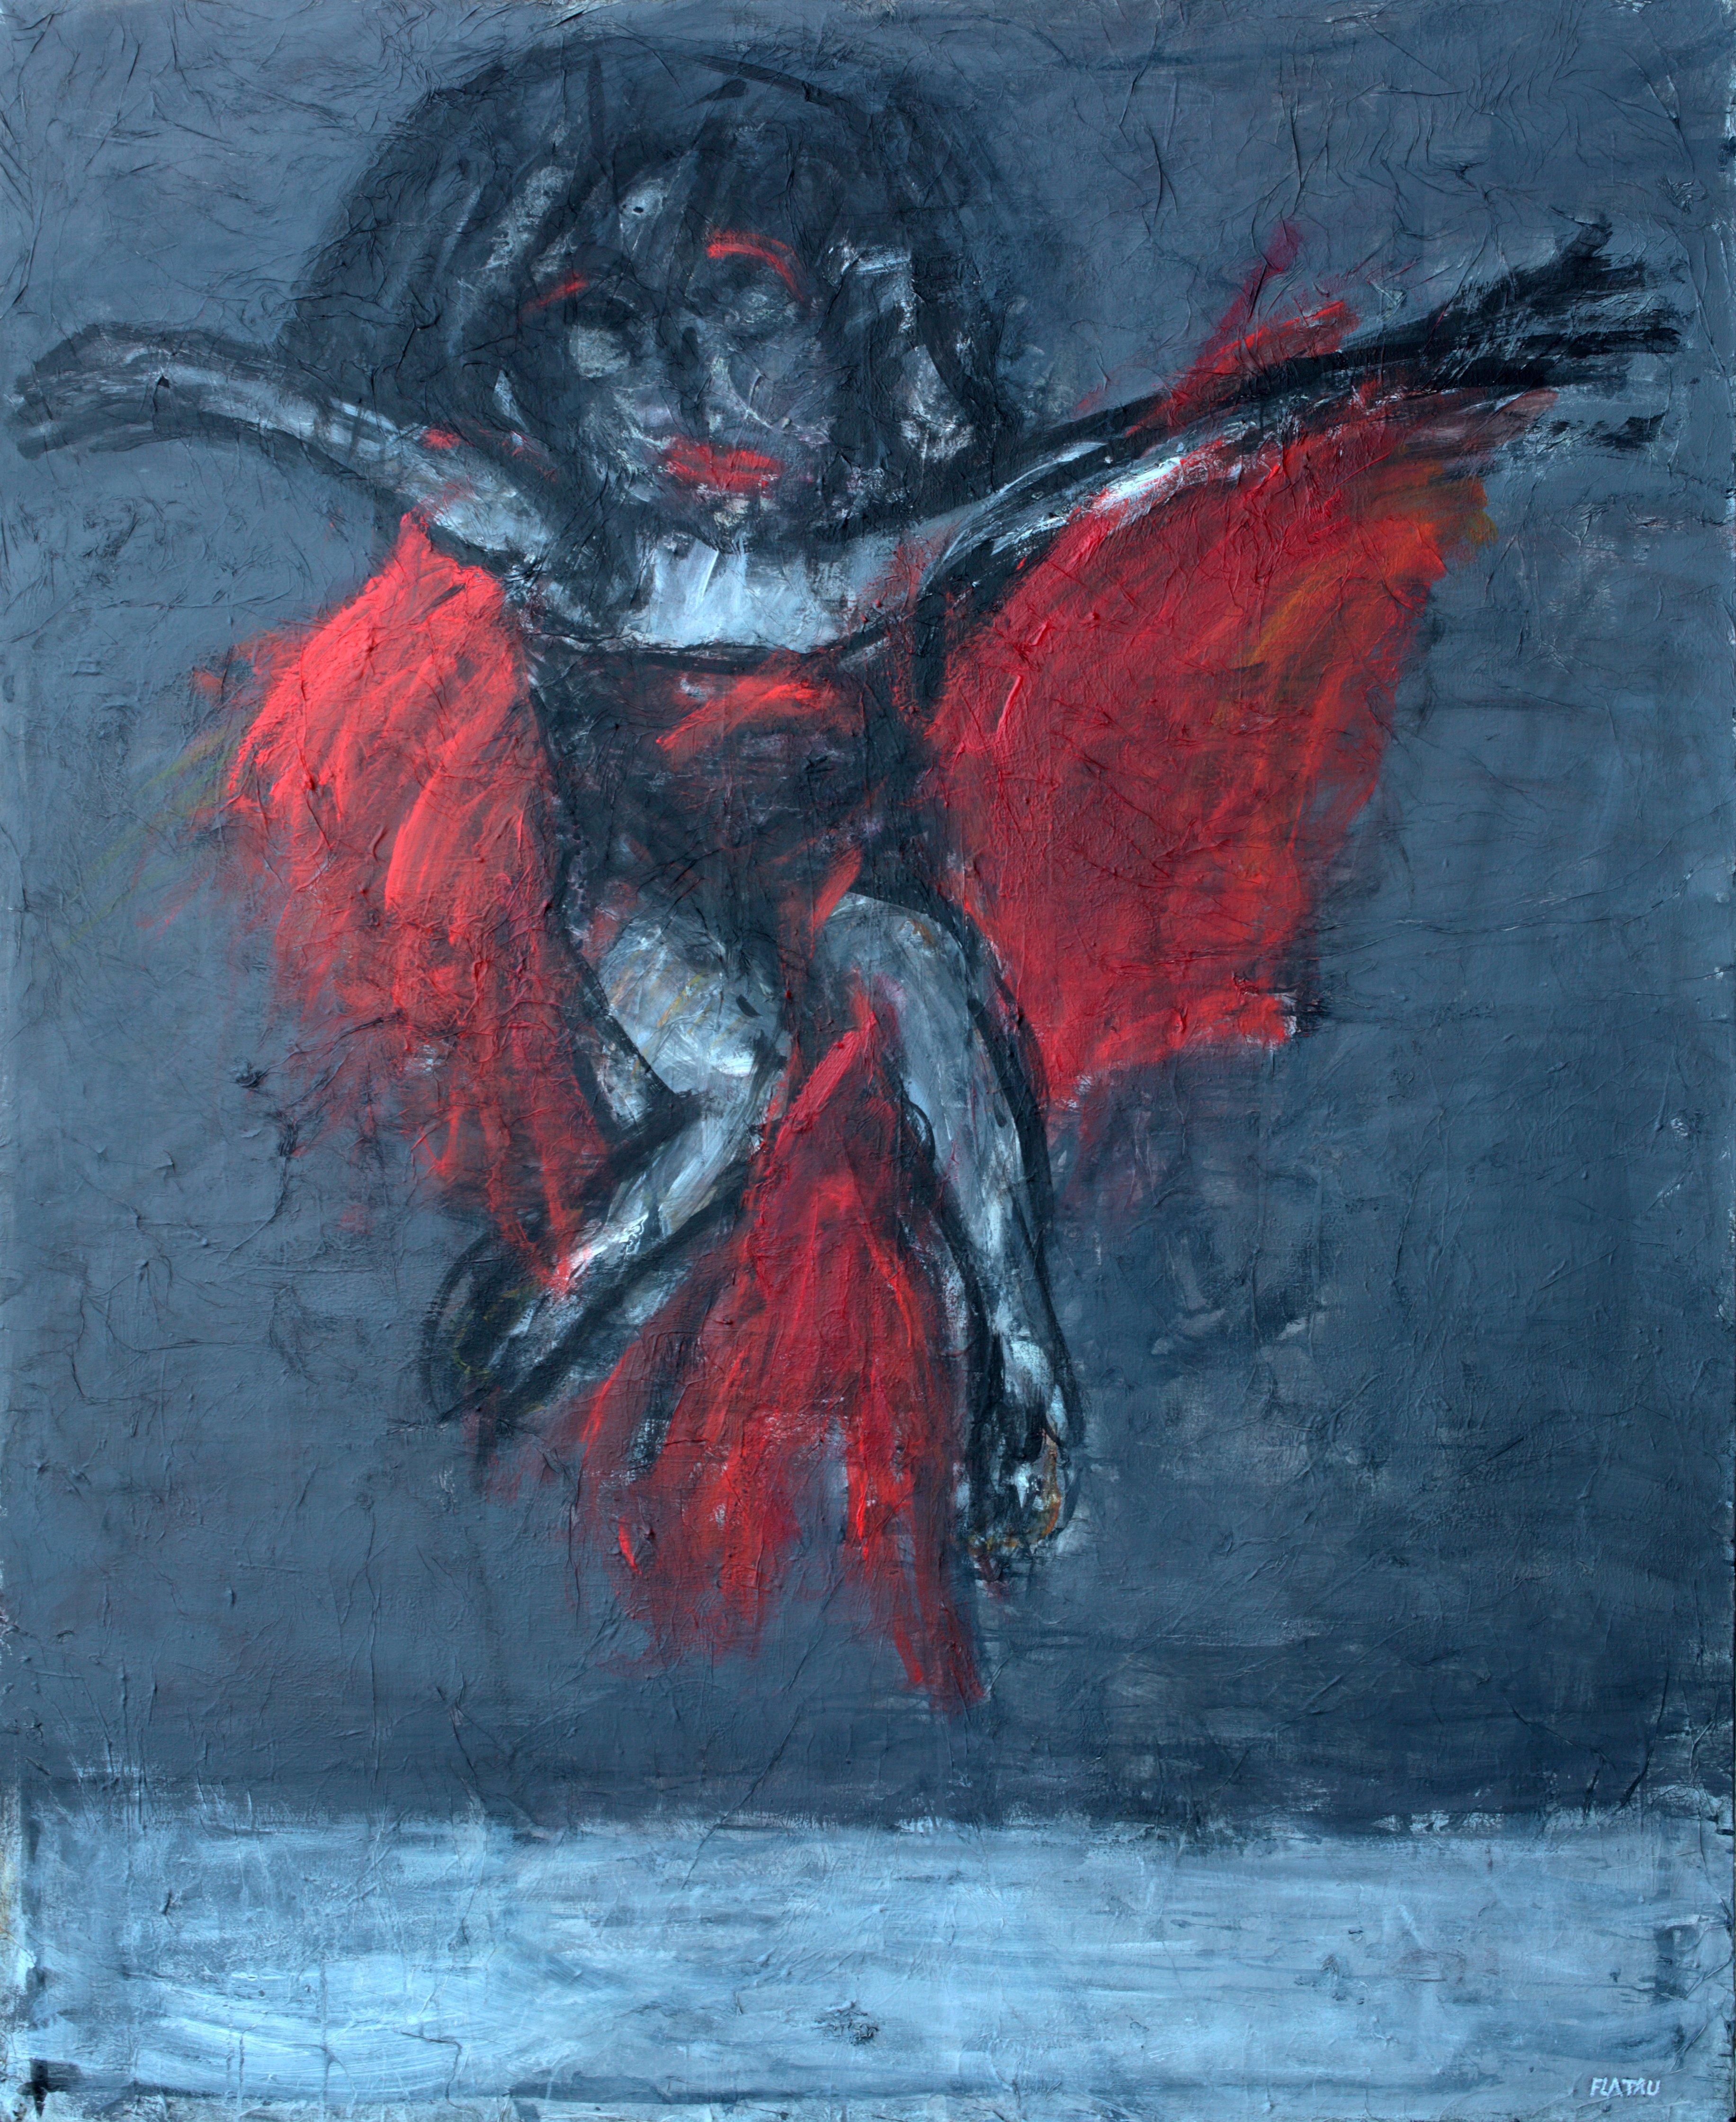 Dance with me - Joanna Flatau, 21st Century, Contemporary Expressionist painting